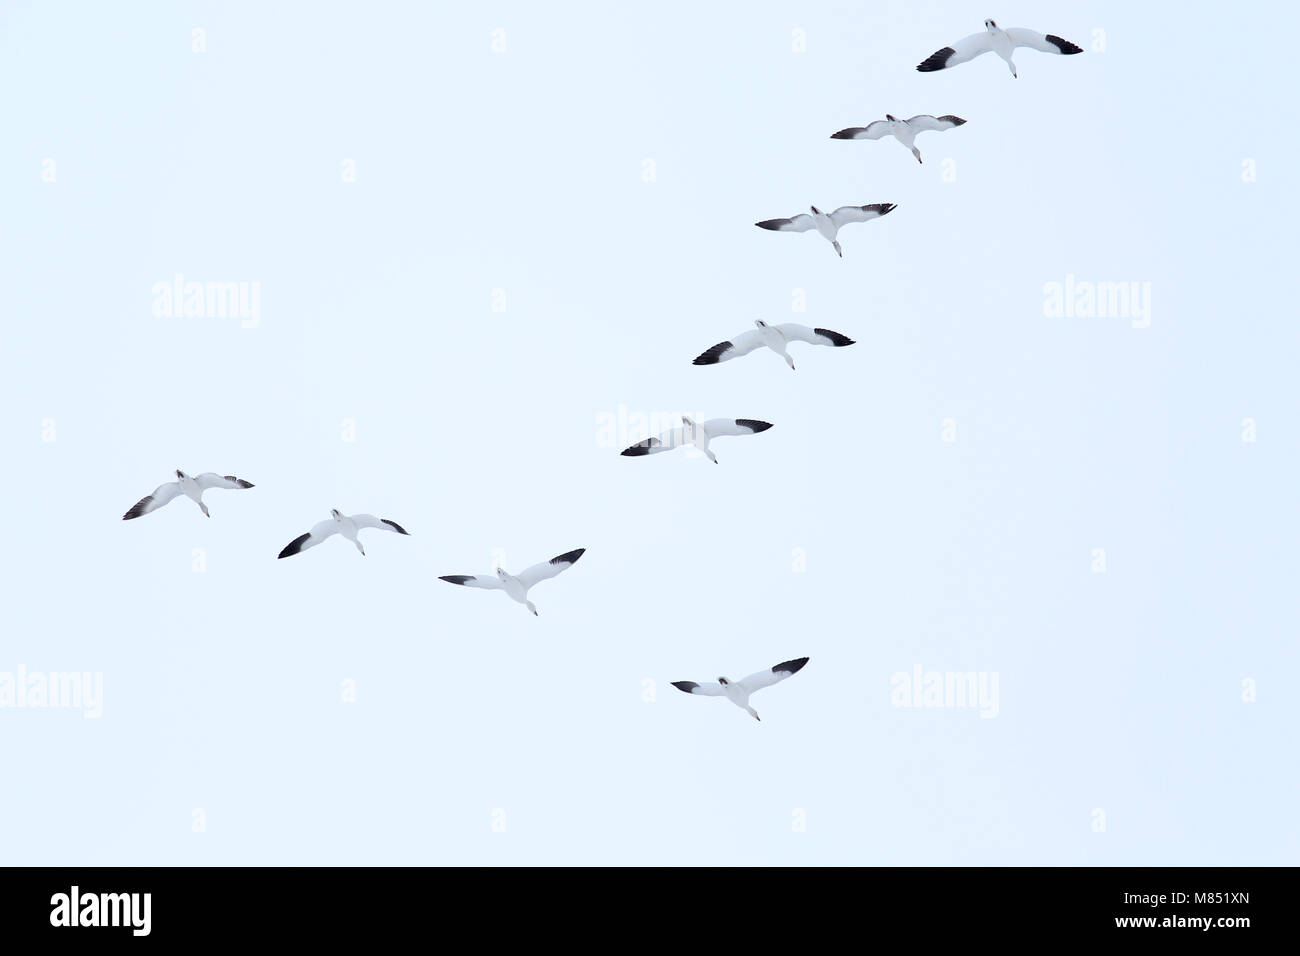 A small flock of snow geese in Delta, Utah Stock Photo